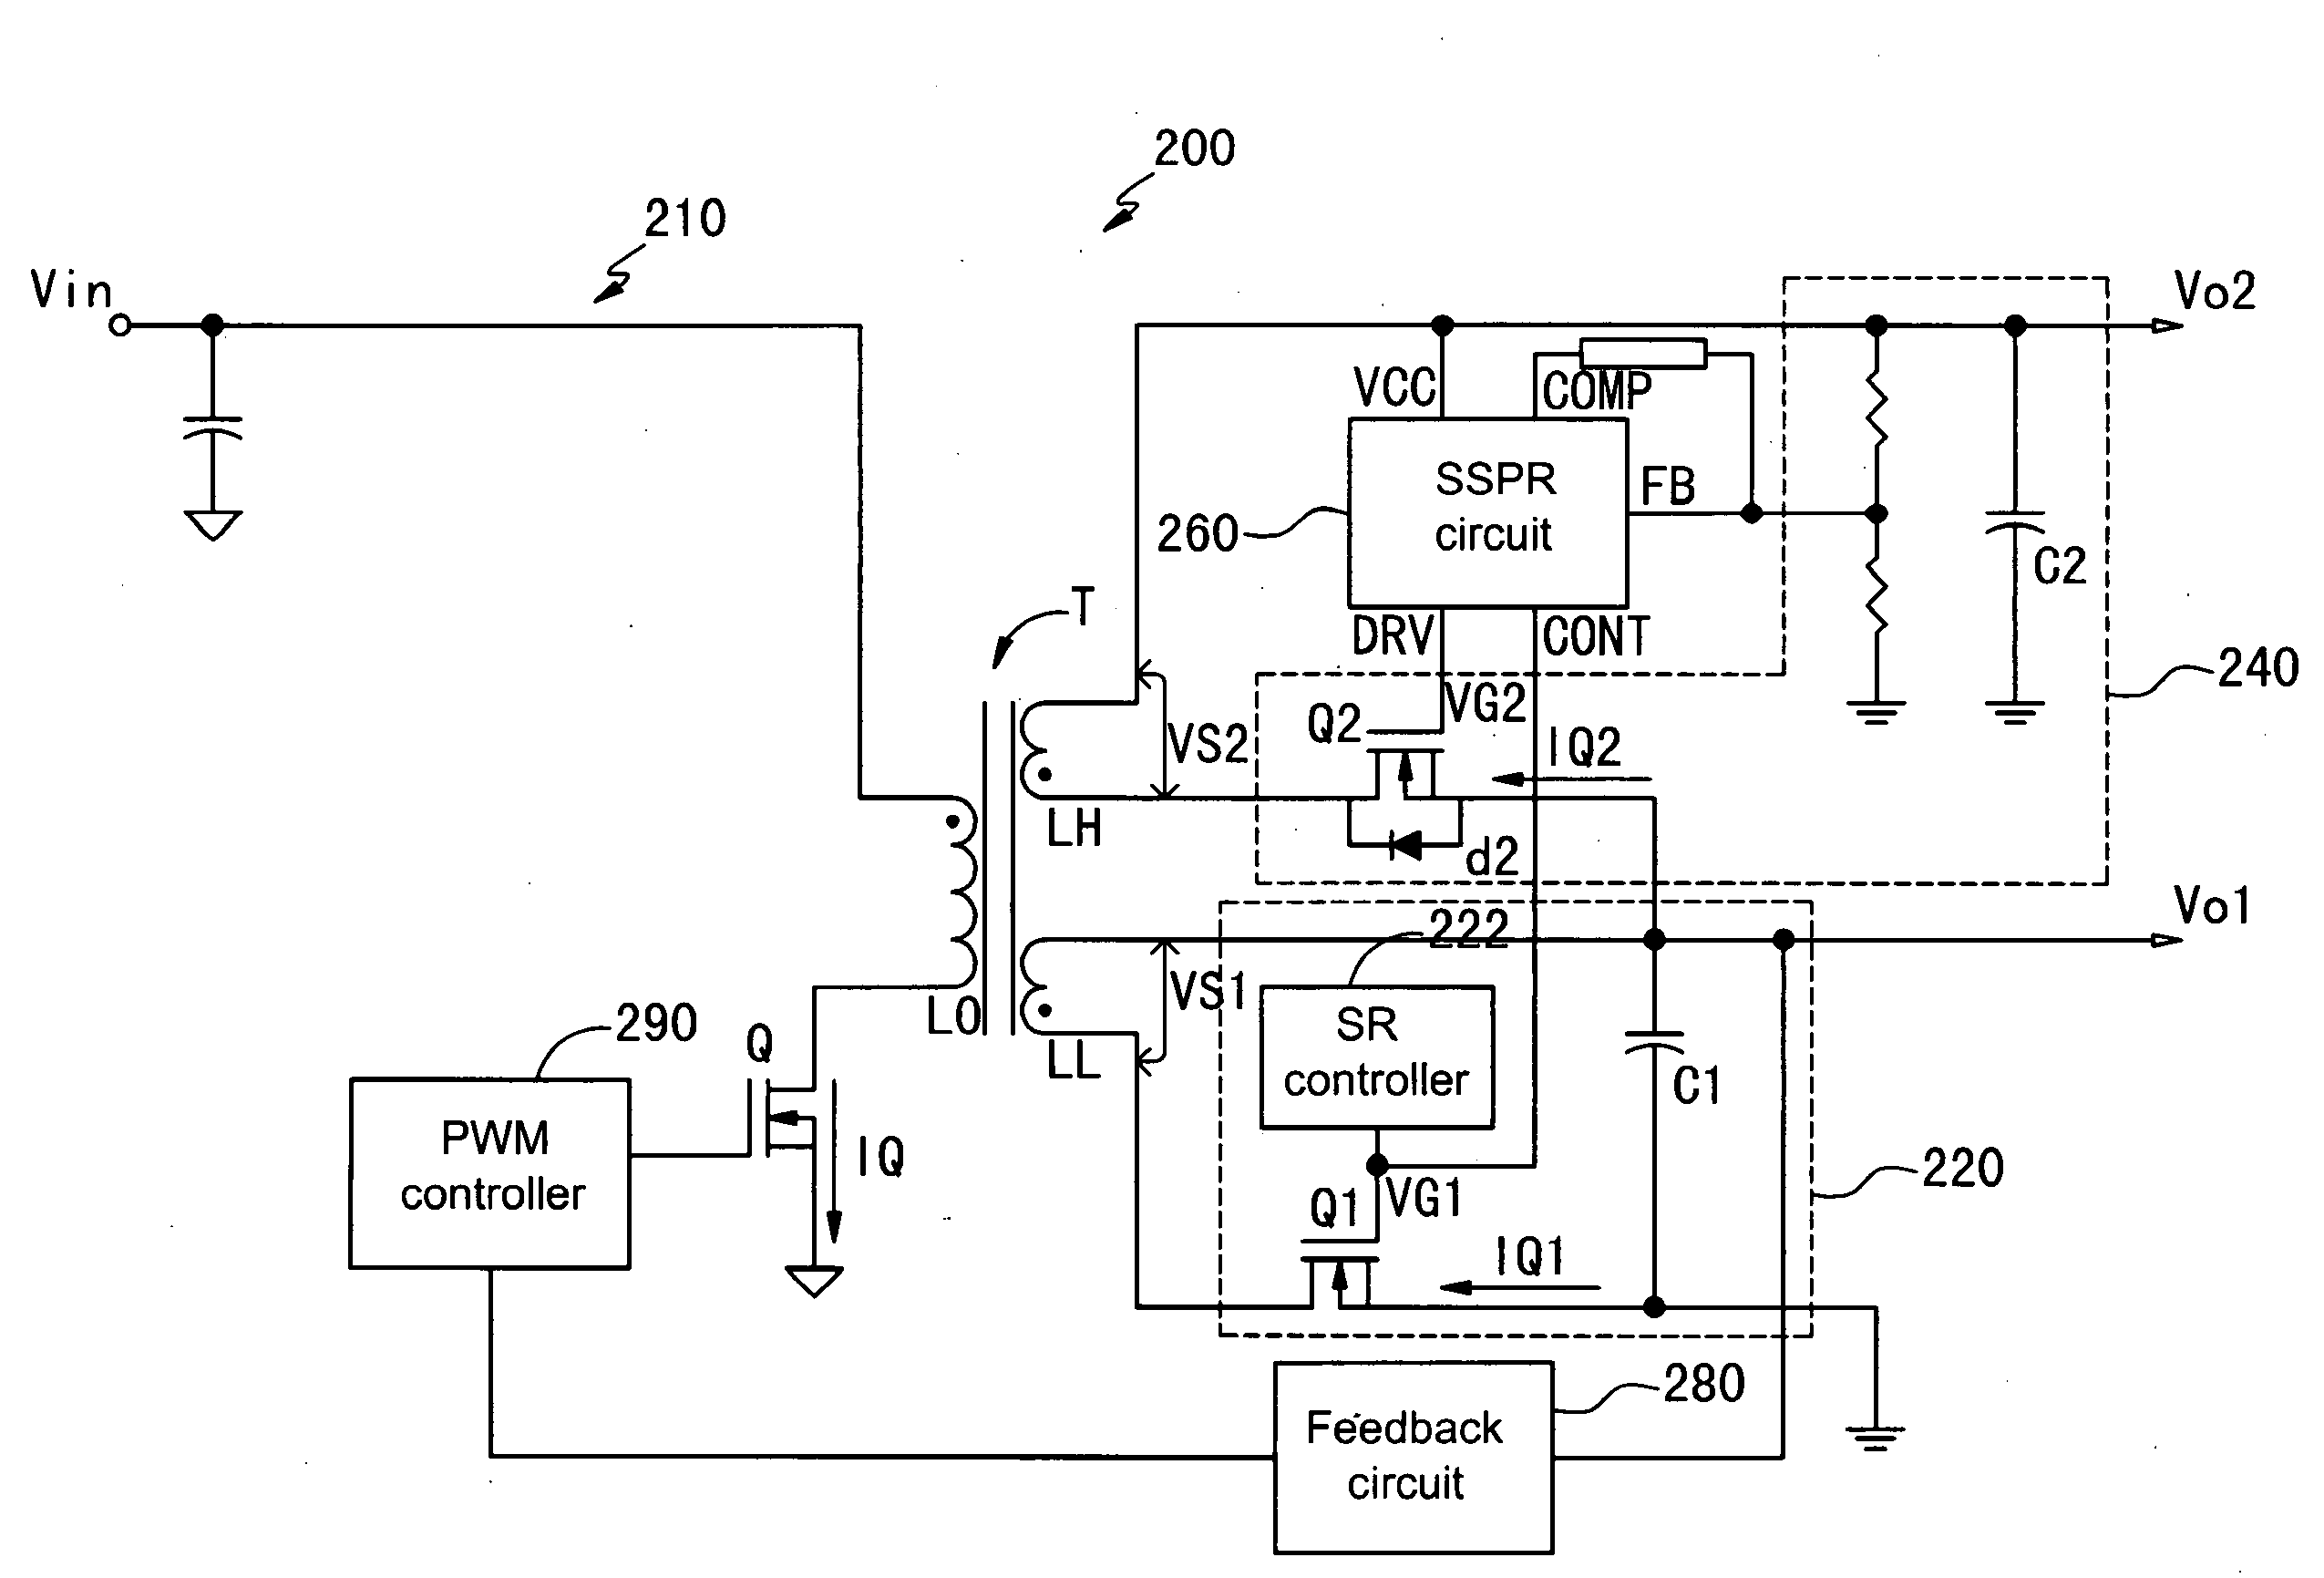 Secondary side post regulator of flyback power converter with multile outputs